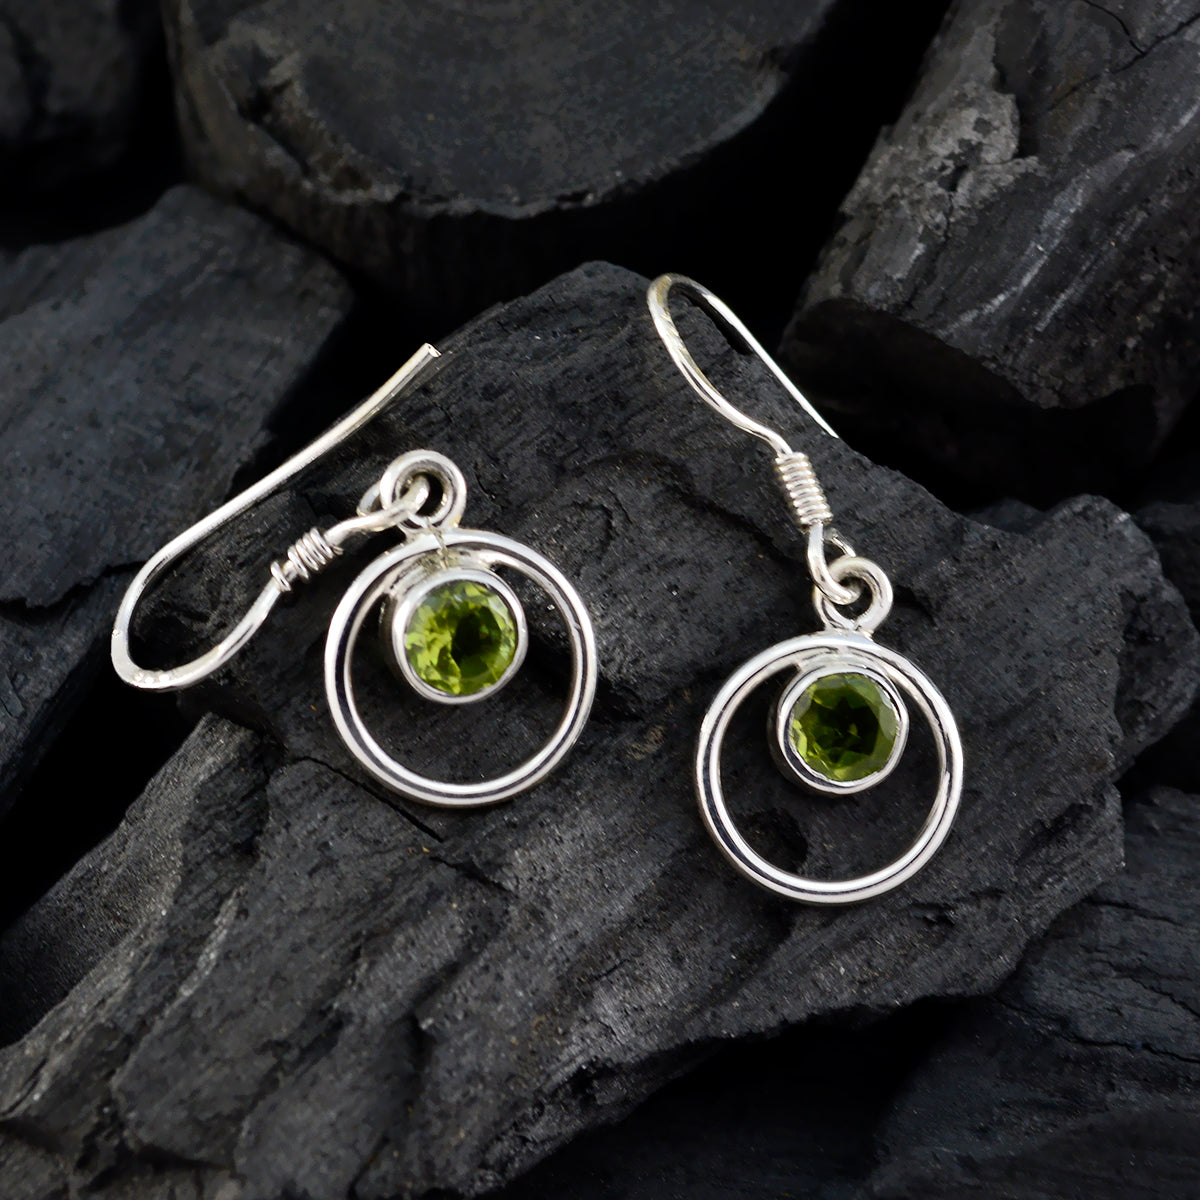 Riyo Real Gemstones round Faceted Green Peridot Silver Earring gift for brithday